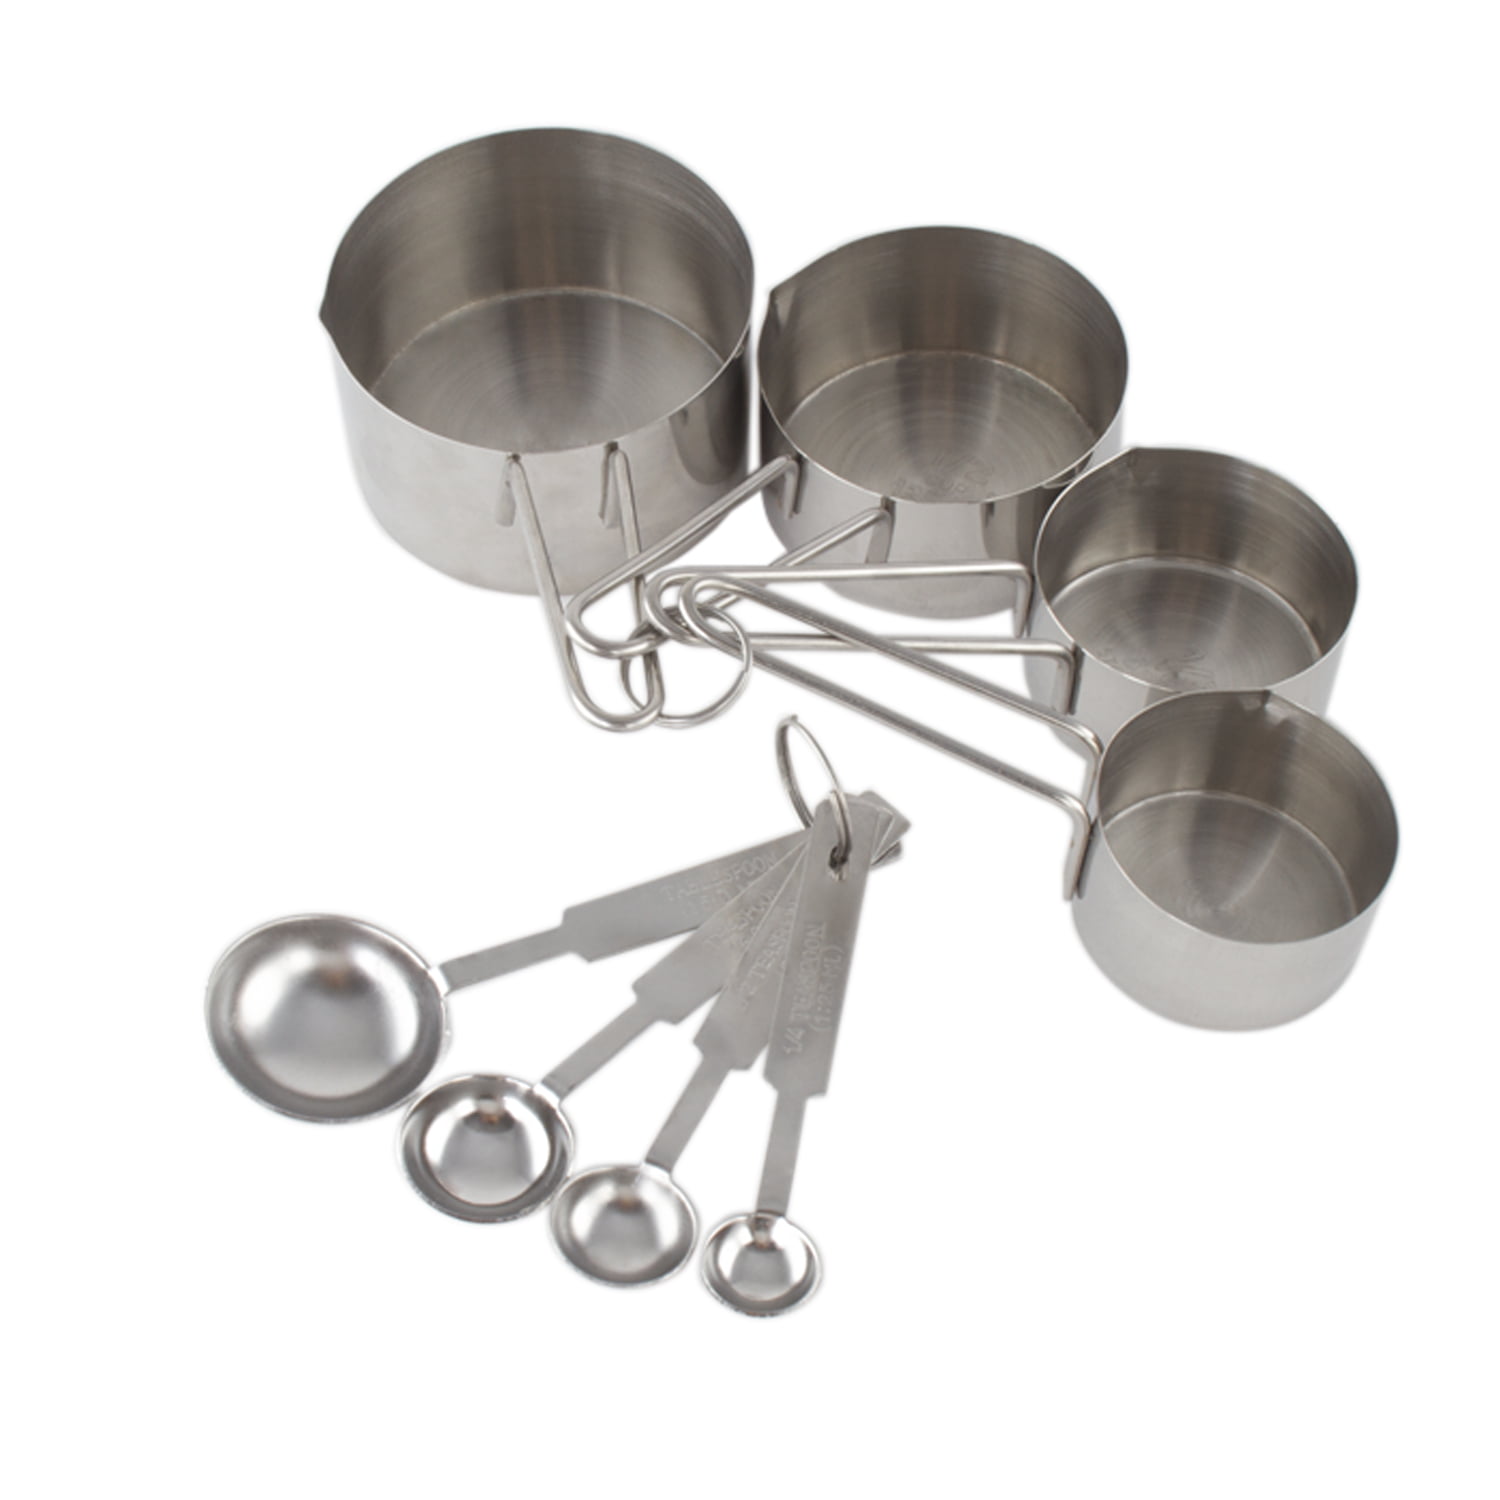 MAYFAIR Silver Stainless Steel Measuring Cup & Spoon Set Set of 9 Mirror  Polish Kitchen Utensils 